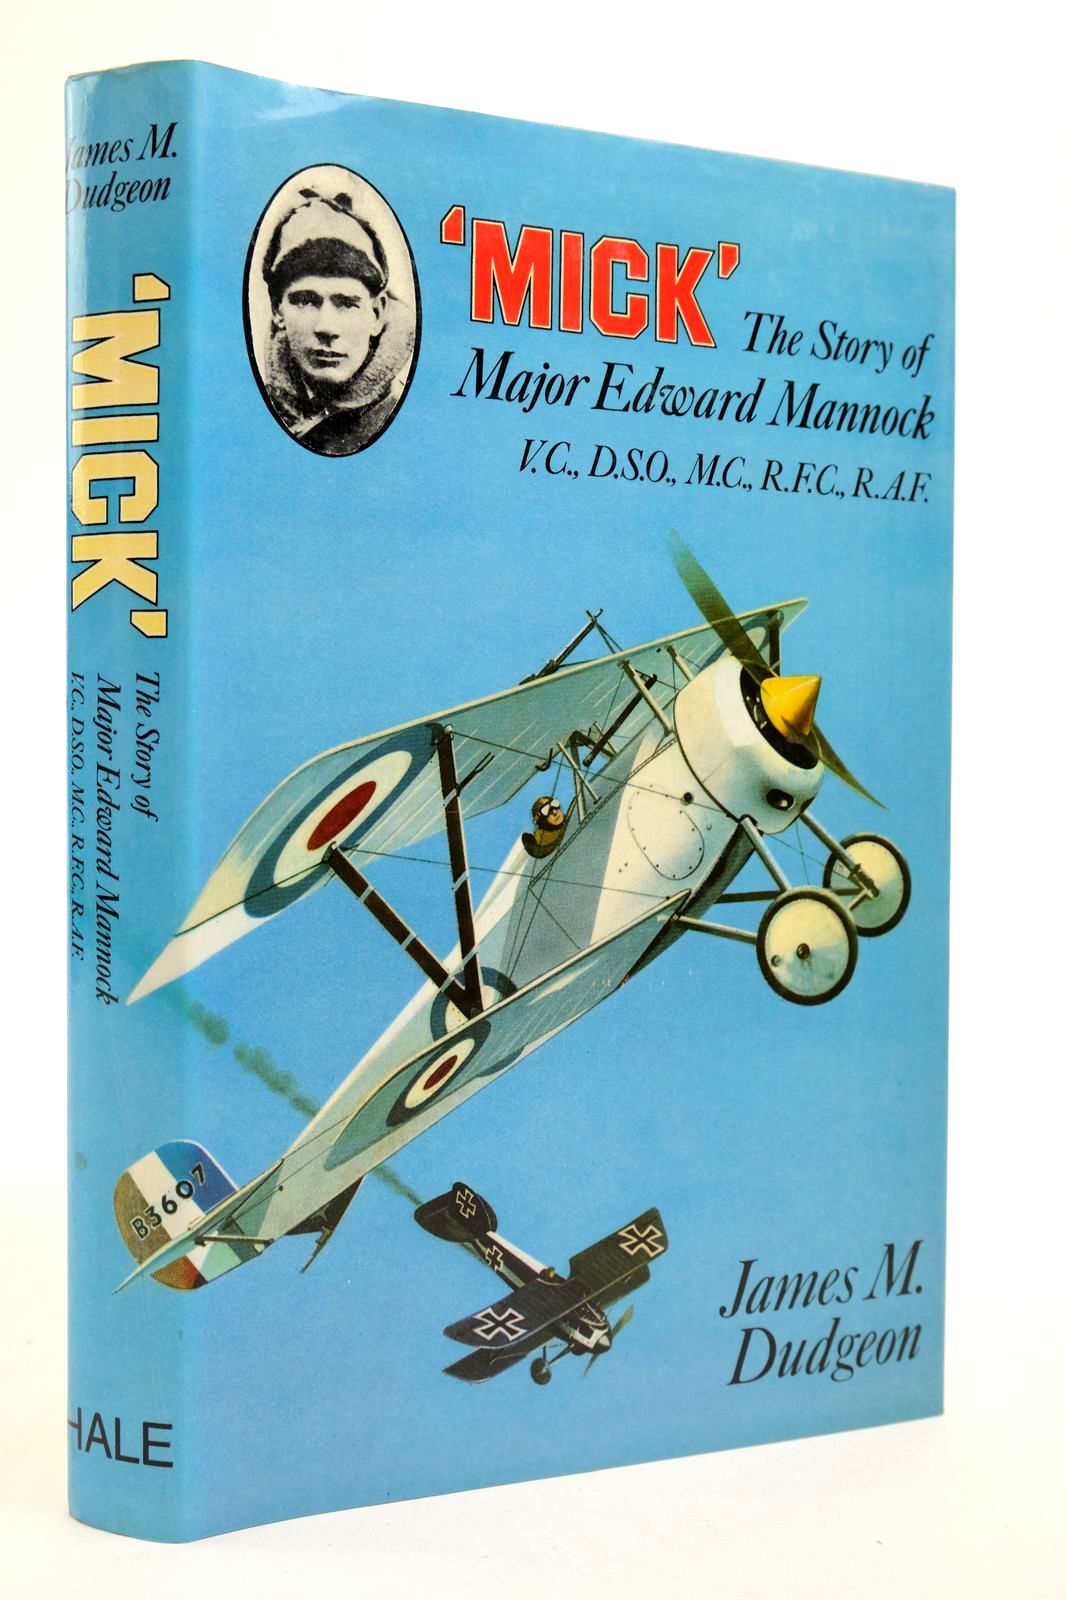 Photo of 'MICK': THE STORY OF MAJOR EDWARD MANNOCK, VC, DSO, MC ROYAL FLYING CORPS AND ROYAL AIR FORCE written by Dudgeon, James M. Caldwell, Keith L. Bader, Douglas published by Robert Hale (STOCK CODE: 2139985)  for sale by Stella & Rose's Books